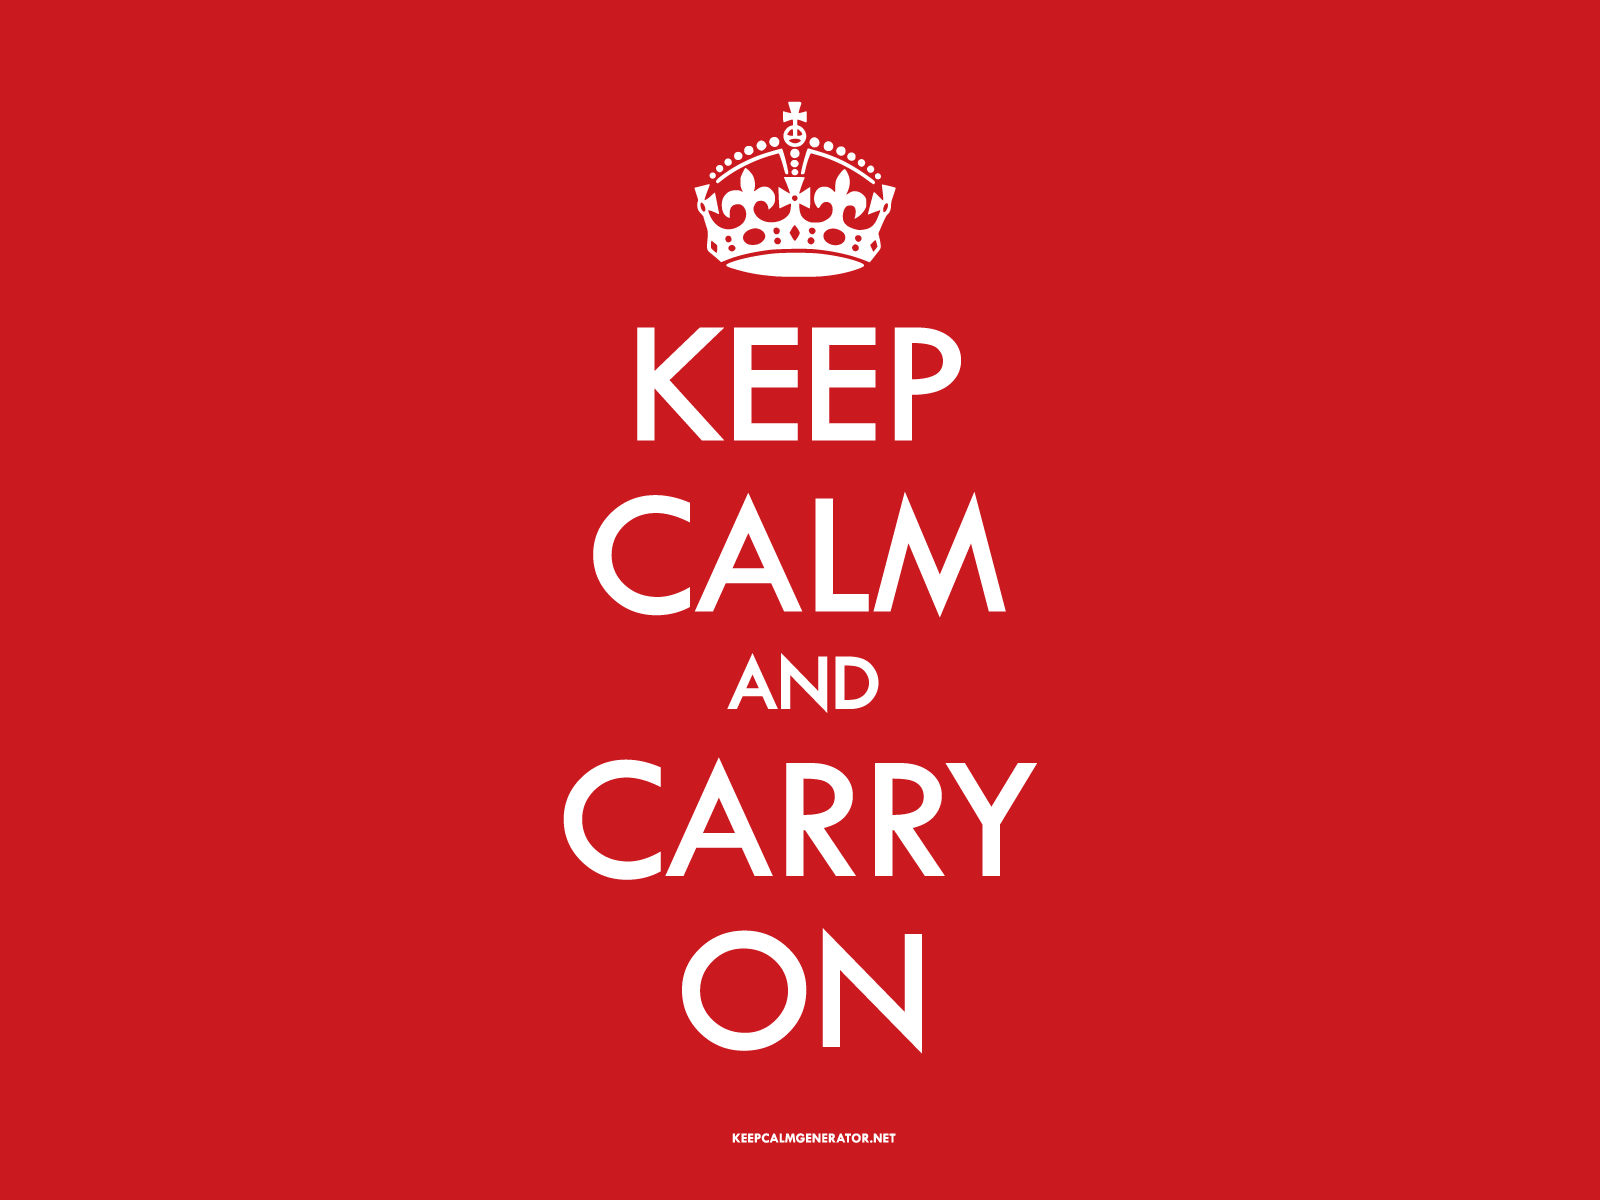 Browse More Keep Calm Messenger Bags At And